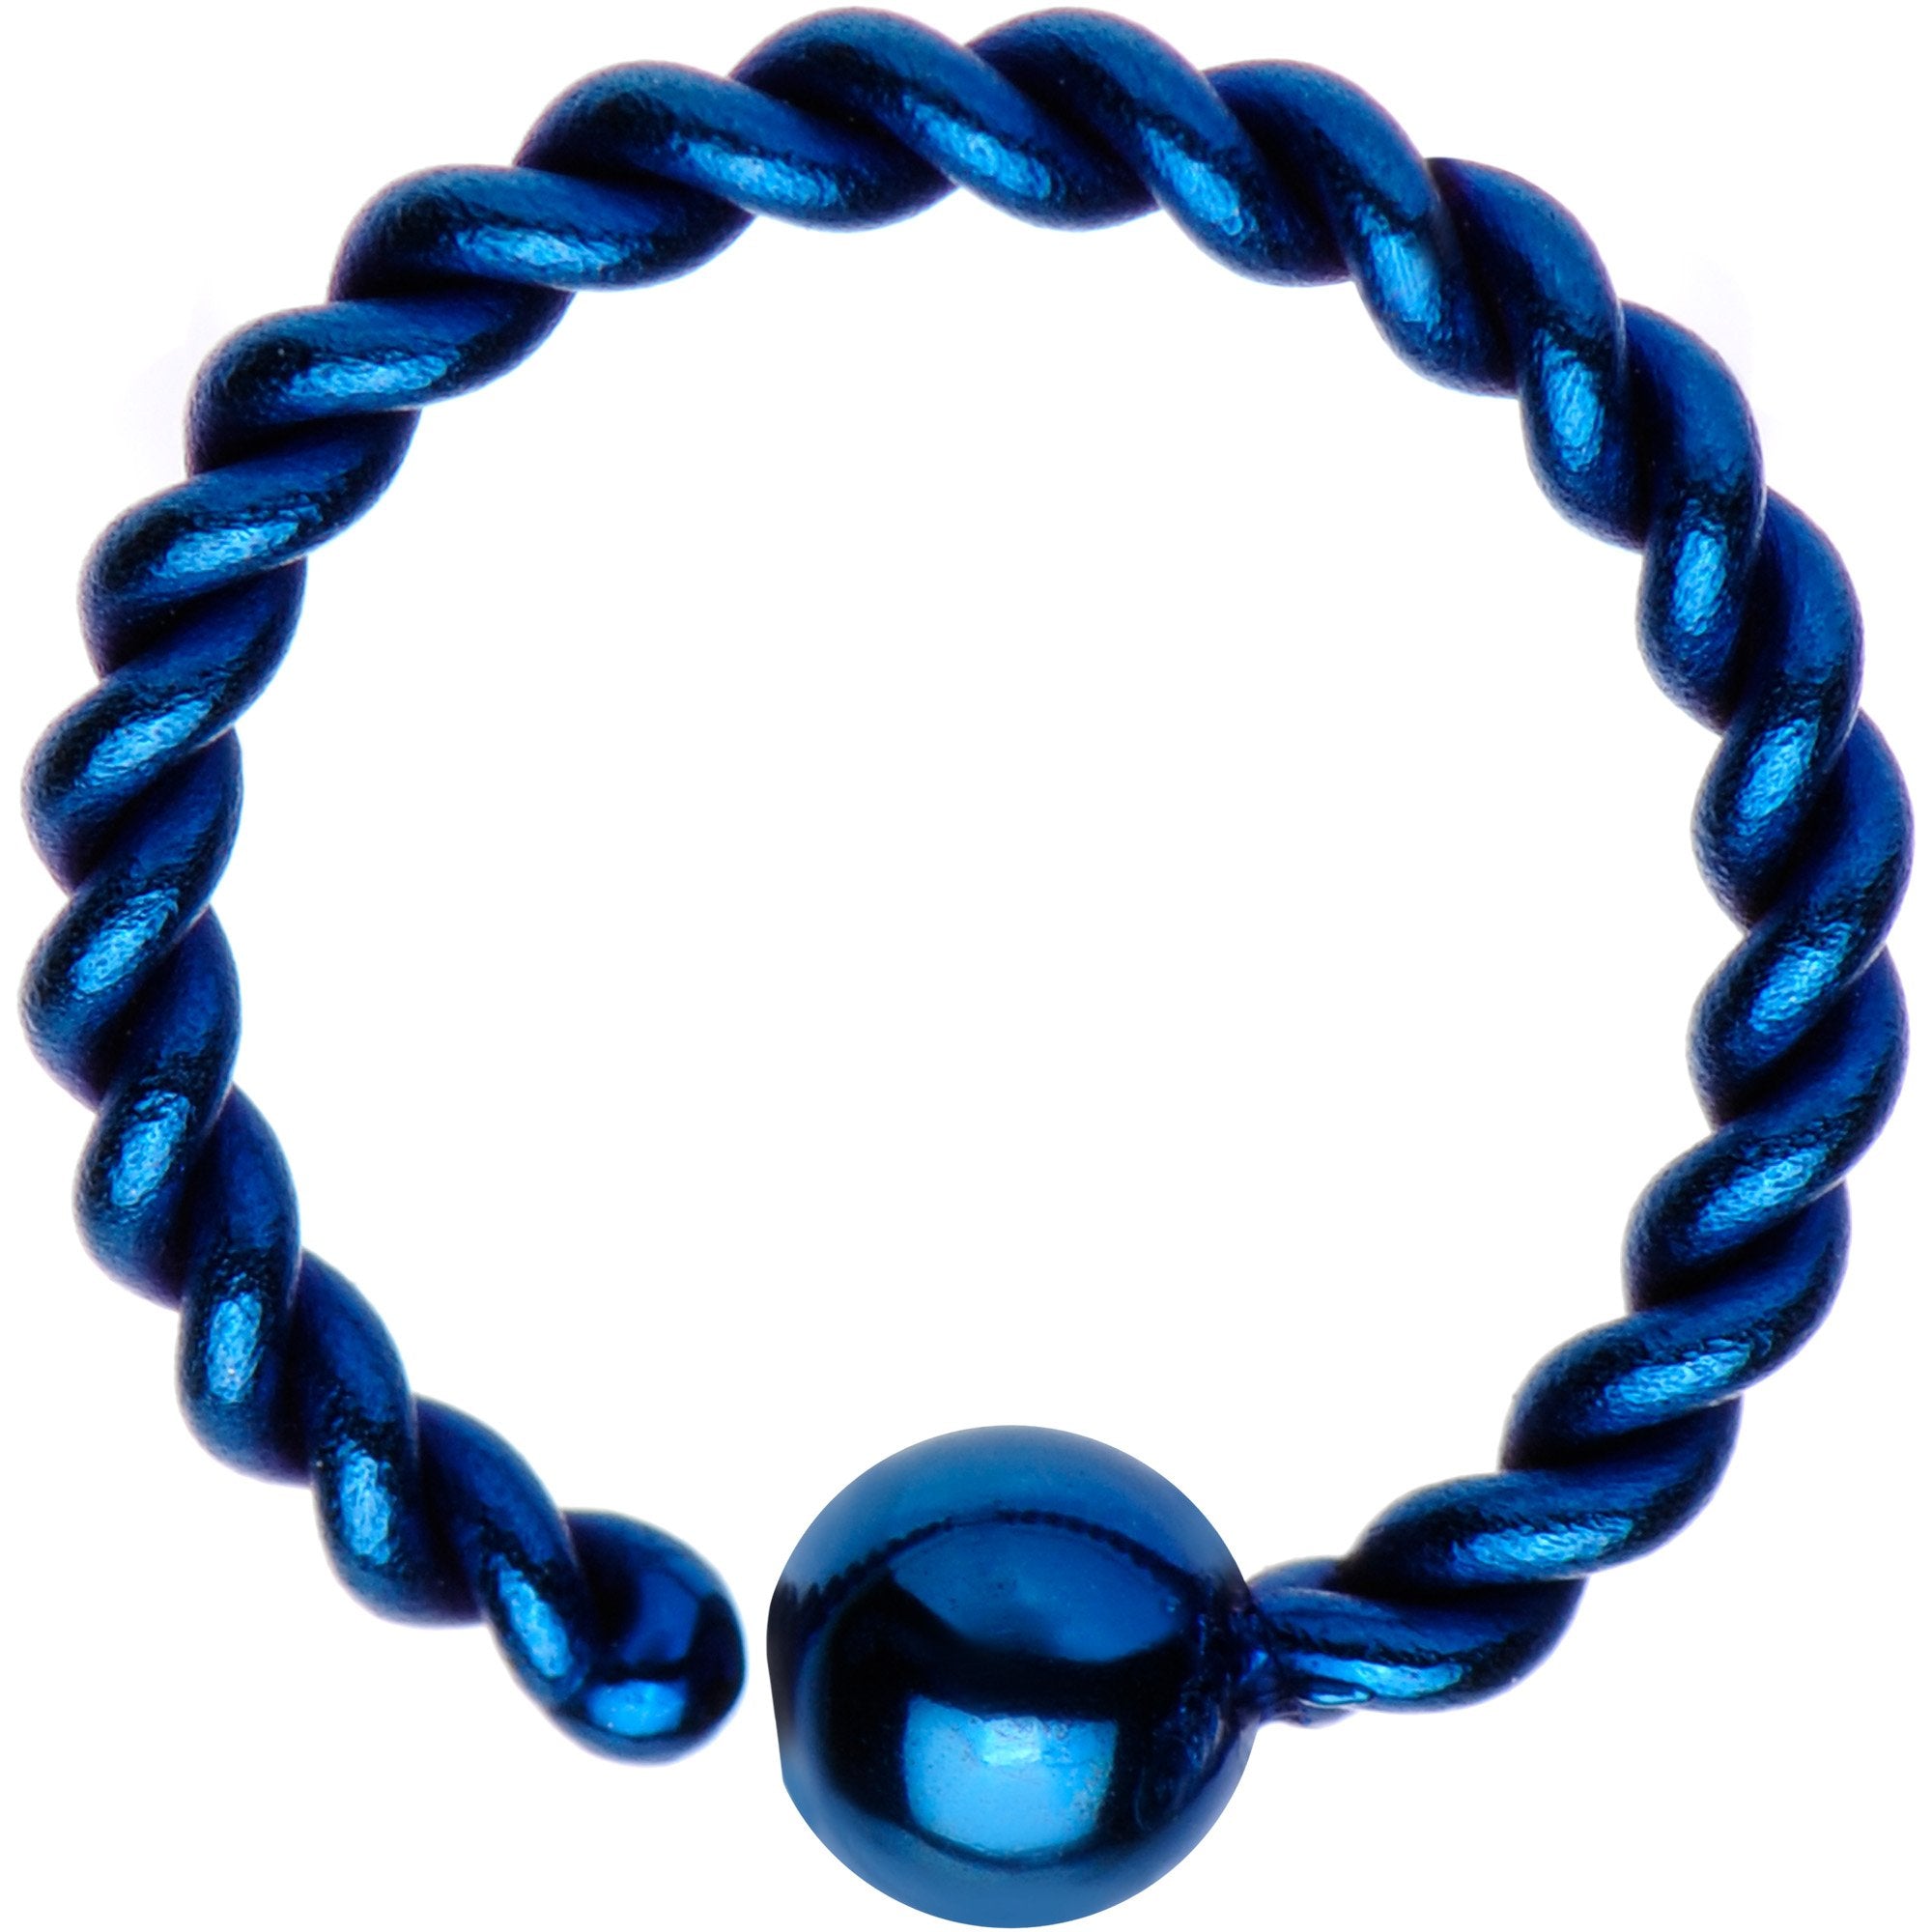 16 Gauge 5/16" Blue IP So Twisted Captive Style Seamless Ring